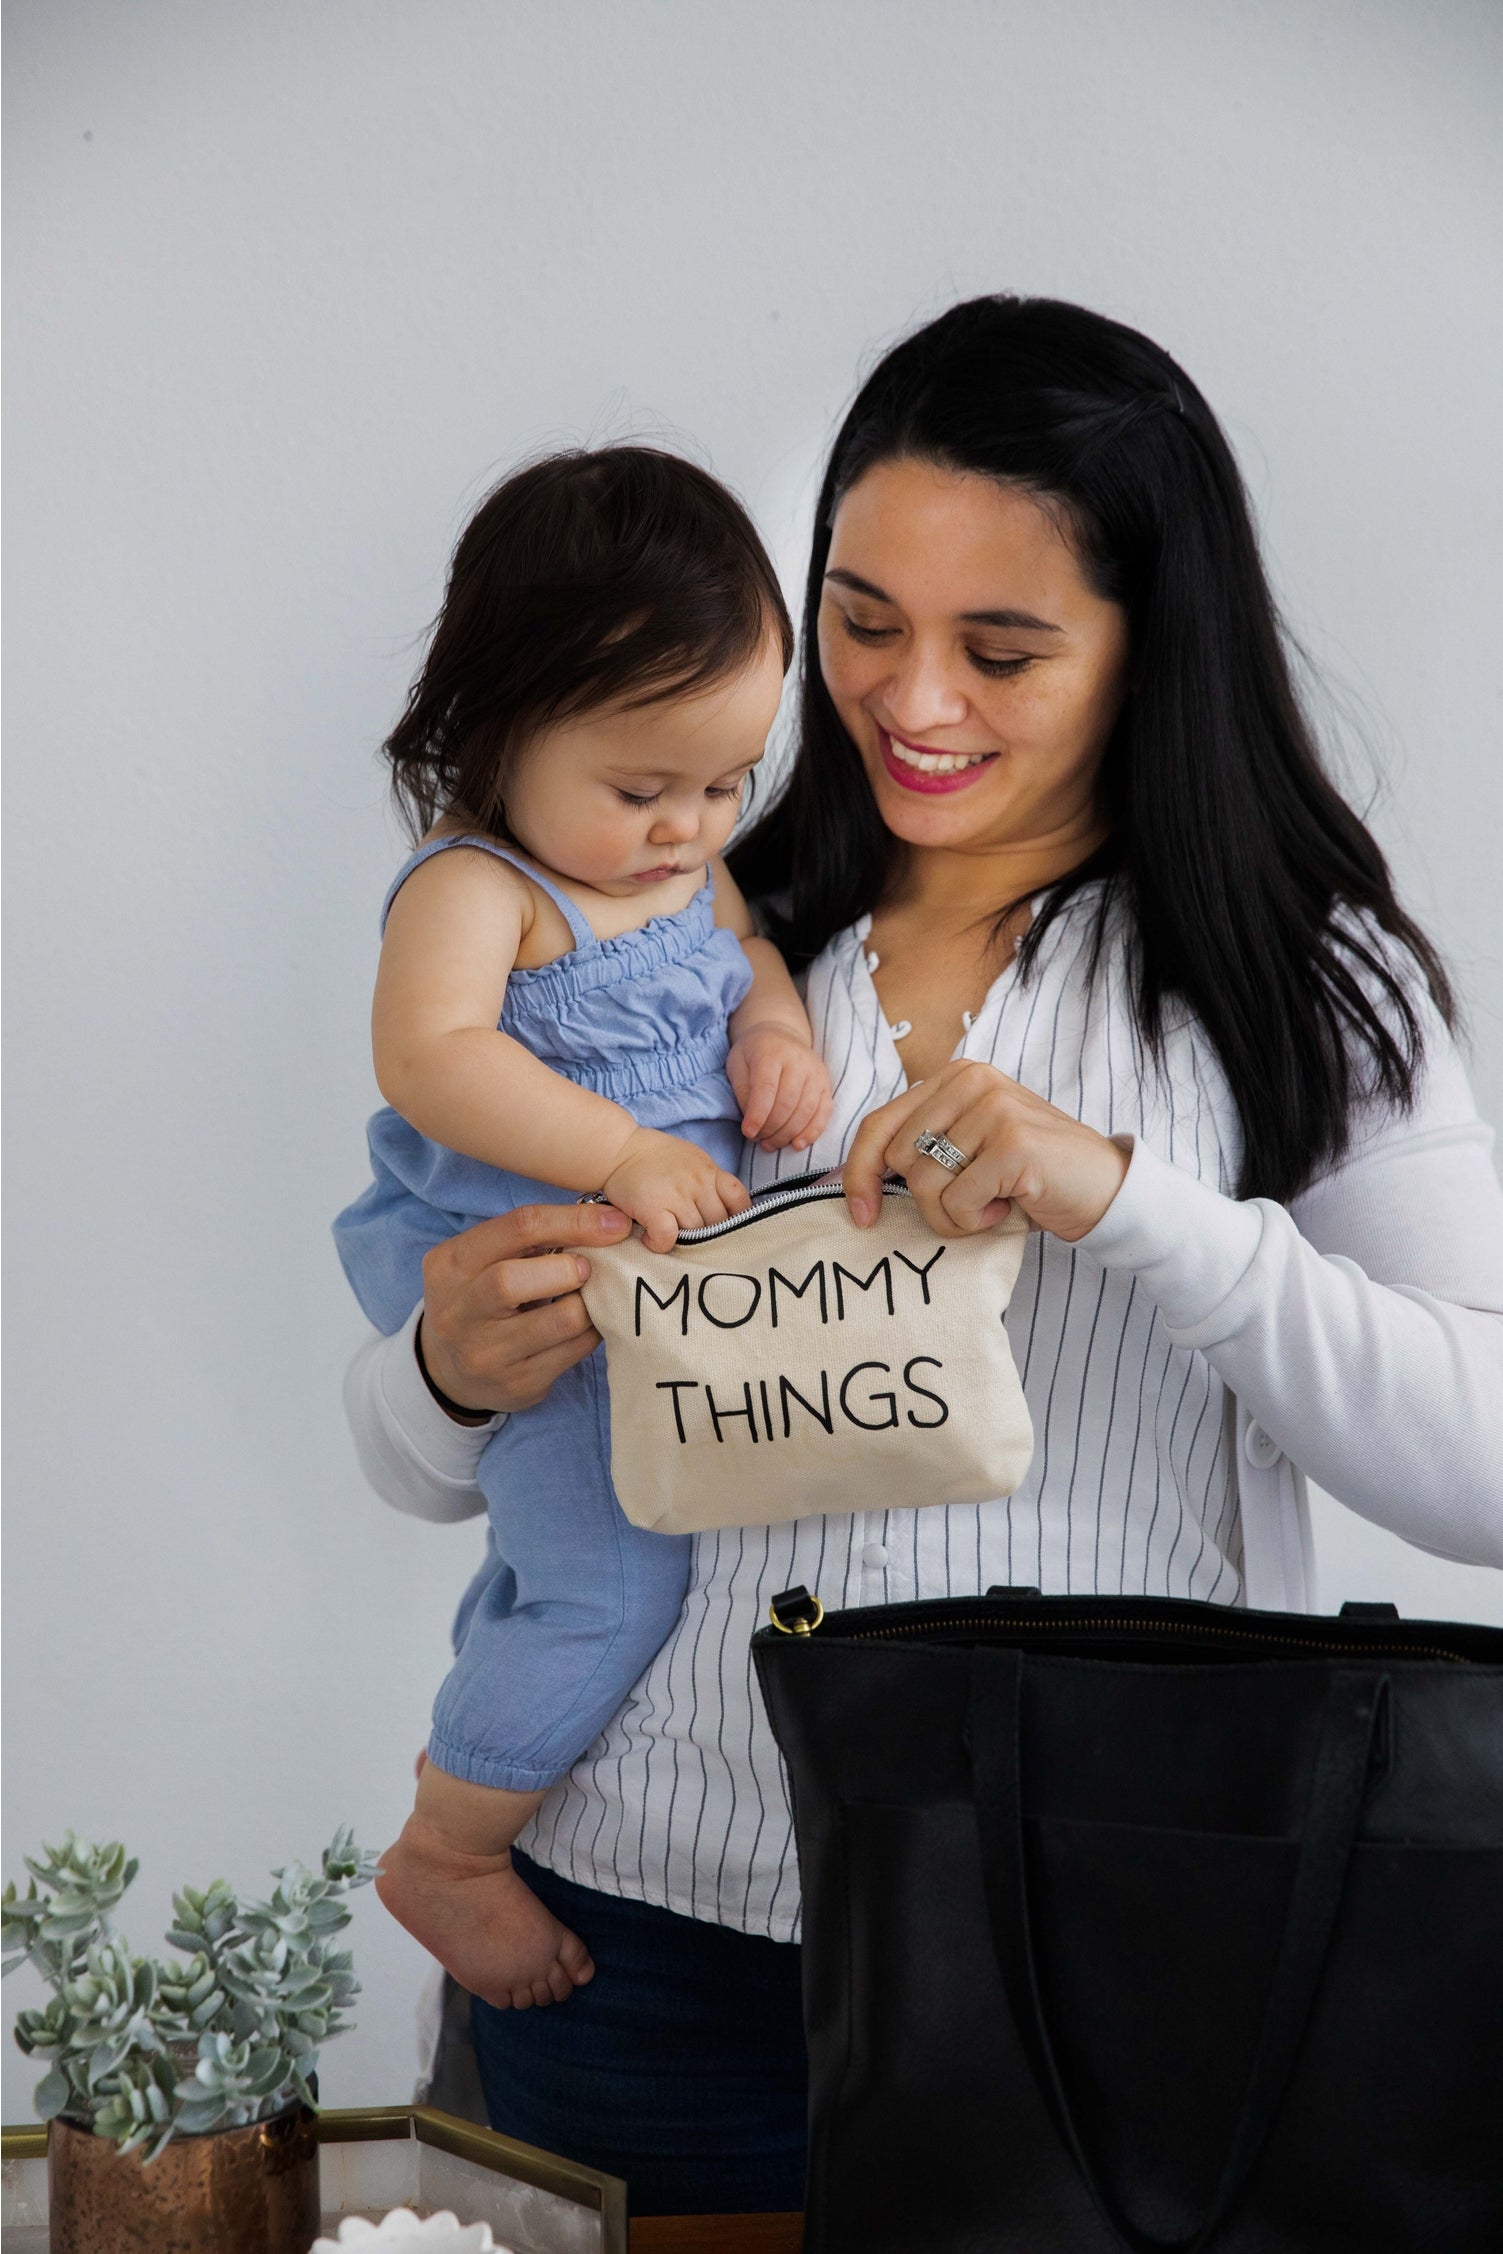 Mommy & Baby Travel Pouch Set